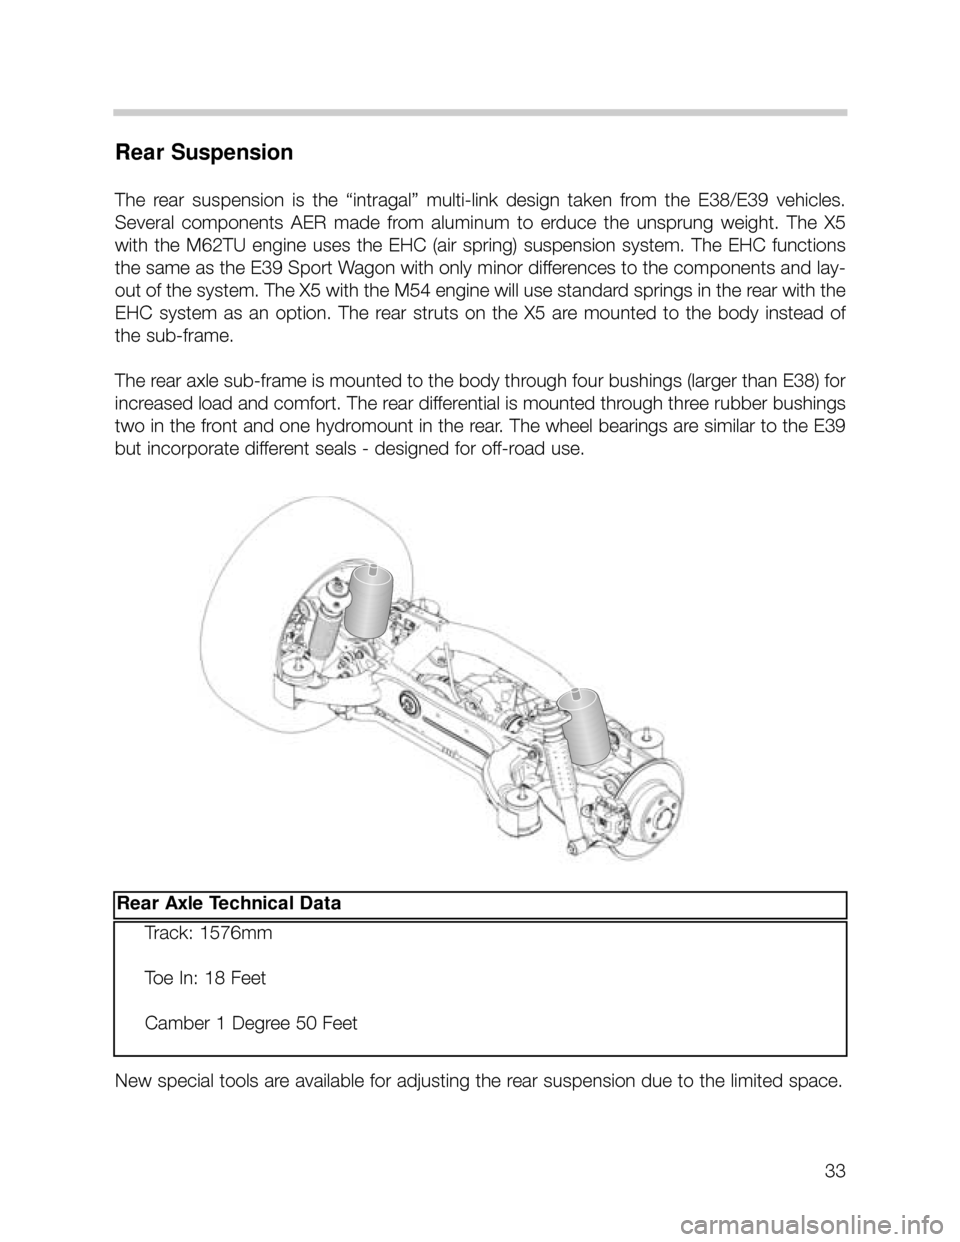 BMW X5 2002 E53 Workshop Manual 33
Rear Suspension
The  rear  suspension  is  the  “intragal”  multi-link  design  taken  from  the  E38/E39  vehicles.
Several  components  AER  made  from  aluminum  to  erduce  the  unsprung  w